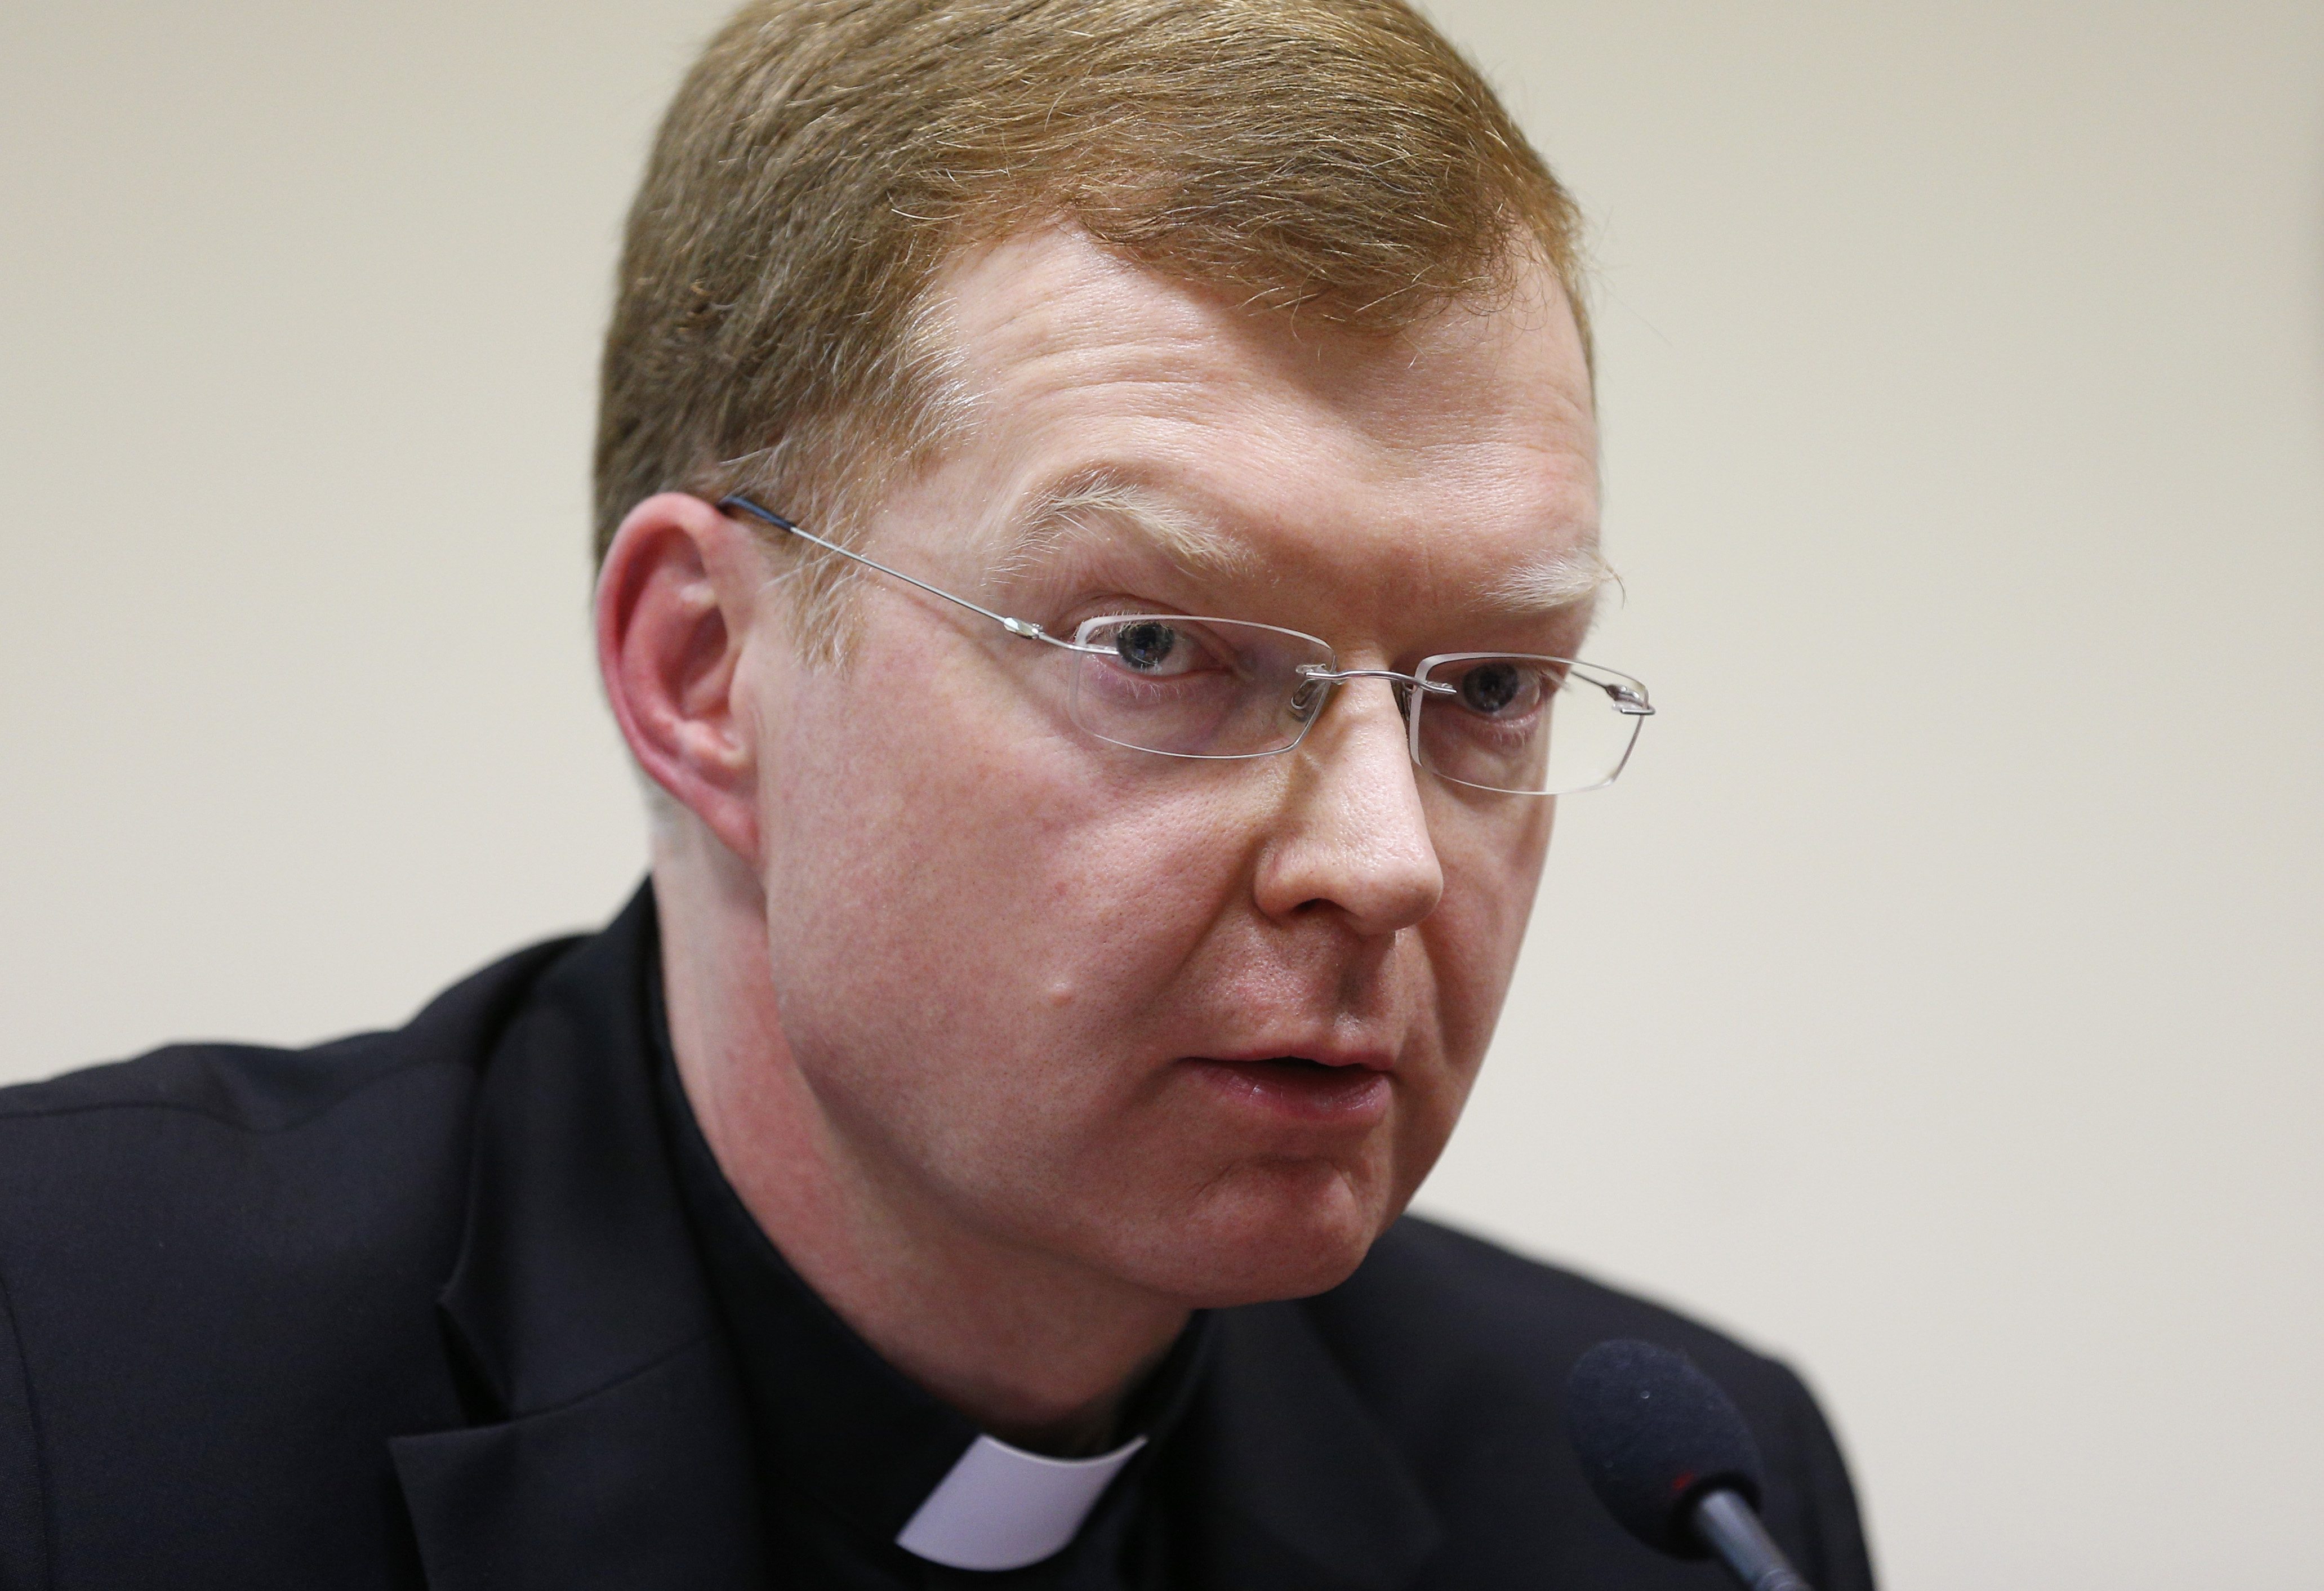 Abuse expert hopes summit will include bishops’ accountability